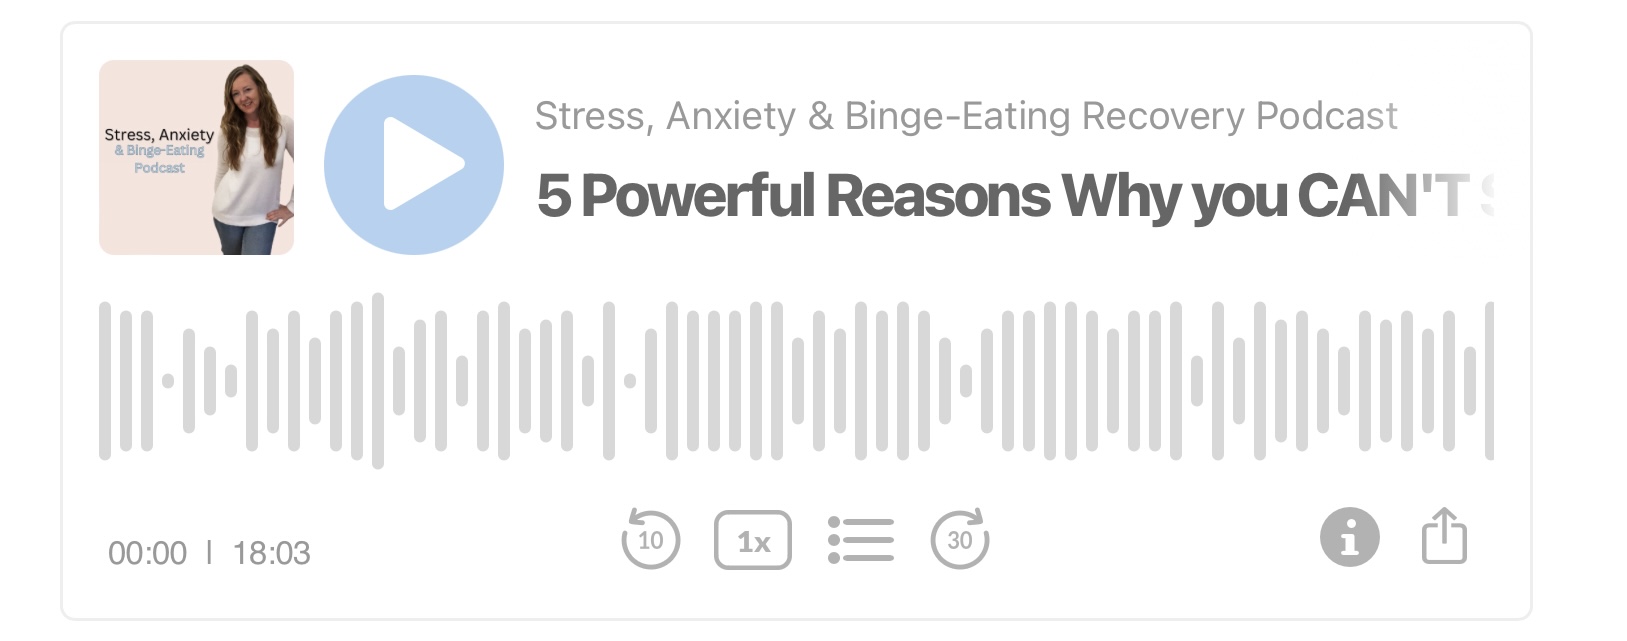 5 Reasons Why You Can't Stop Eating